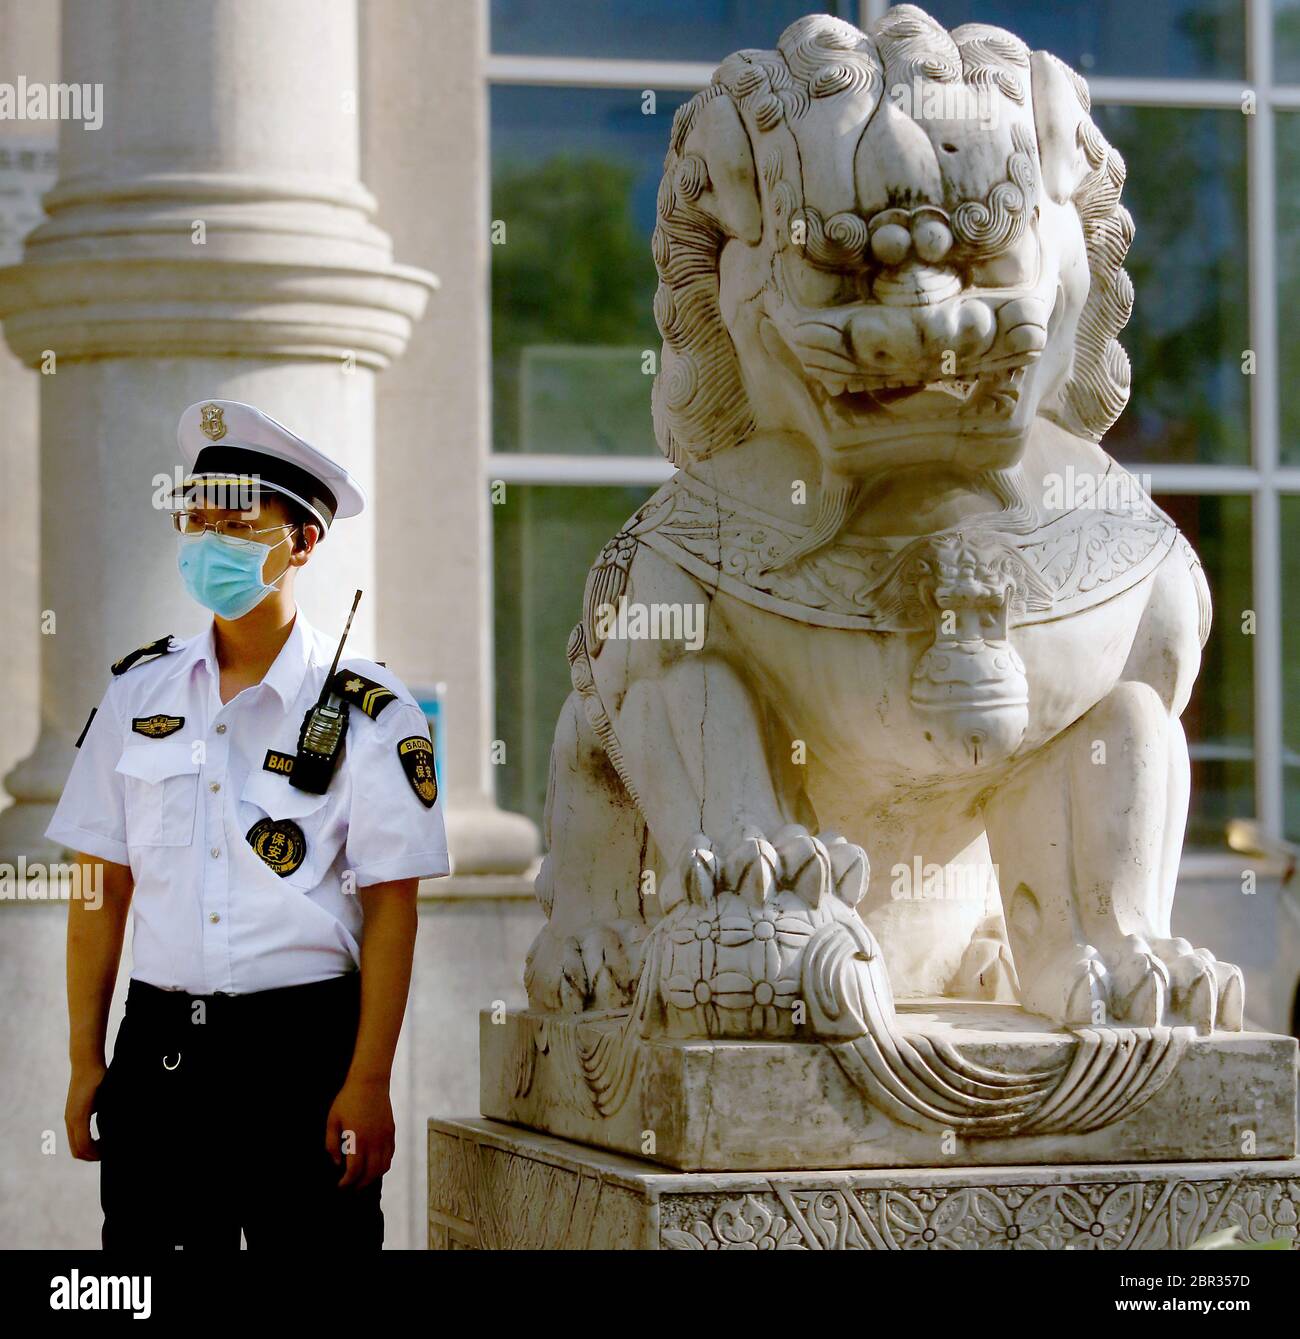 Beijing, China. 20th May, 2020. A Chinese government security guard stands next to a traditional 'Guardian Lion' placed outside a bank in Beijing on Wednesday, May 20, 2020. Wuhan, a city of 11 million, where the Covid-19 pandemic originated, reported new cases over the weekend, its first new infections in over a month. China is aggressively investigating the new cluster, announcing a plan to test the entire city in 10 days. Photo by Stephen Shaver/UPI Credit: UPI/Alamy Live News Stock Photo